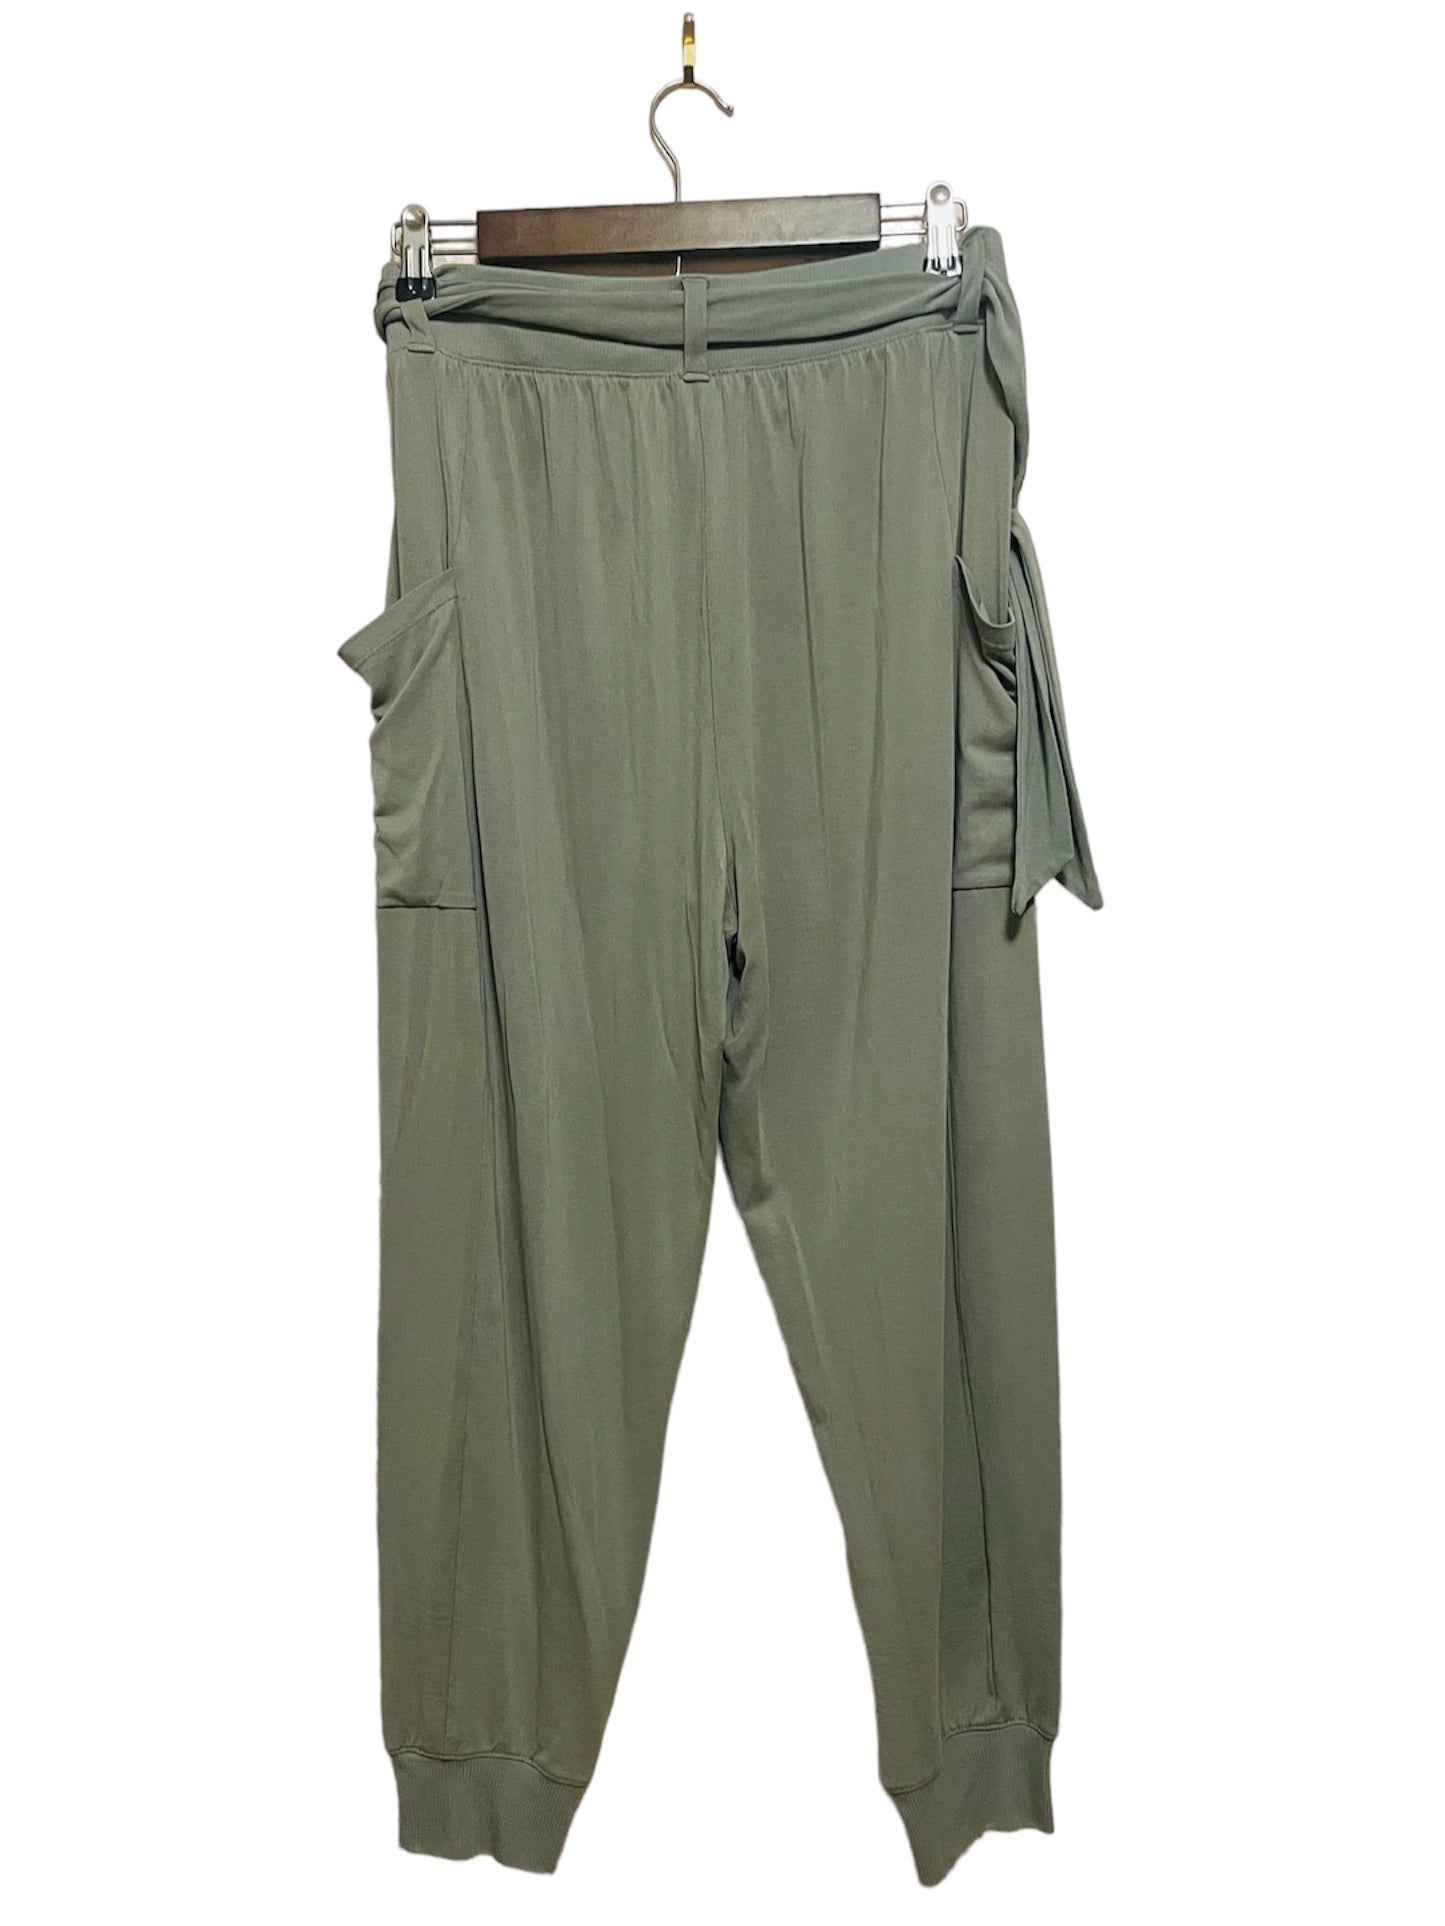 Aerie Front Tie Joggers (small stain as shown) Size: Medium